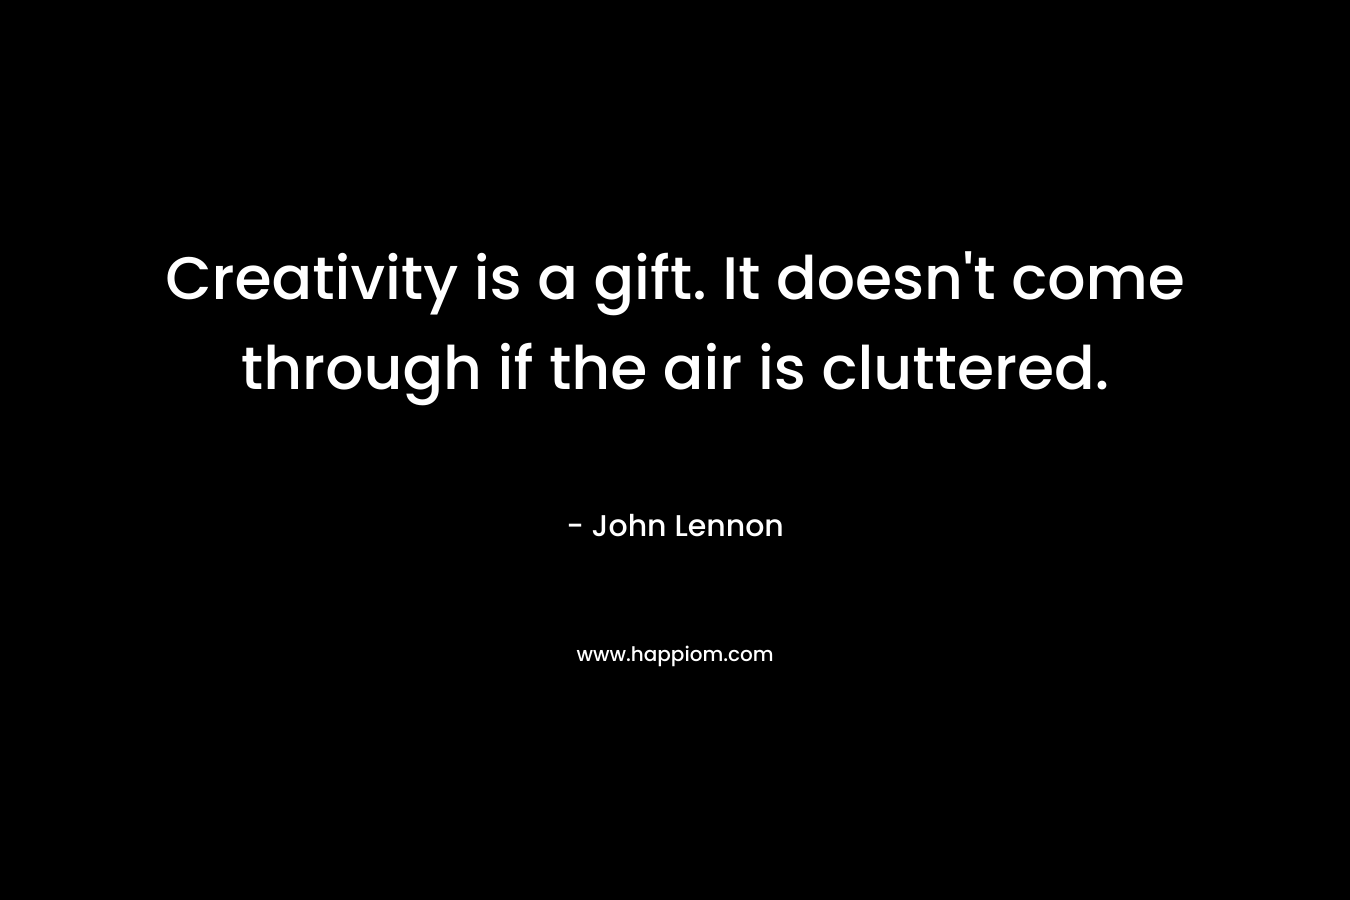 Creativity is a gift. It doesn’t come through if the air is cluttered. – John Lennon